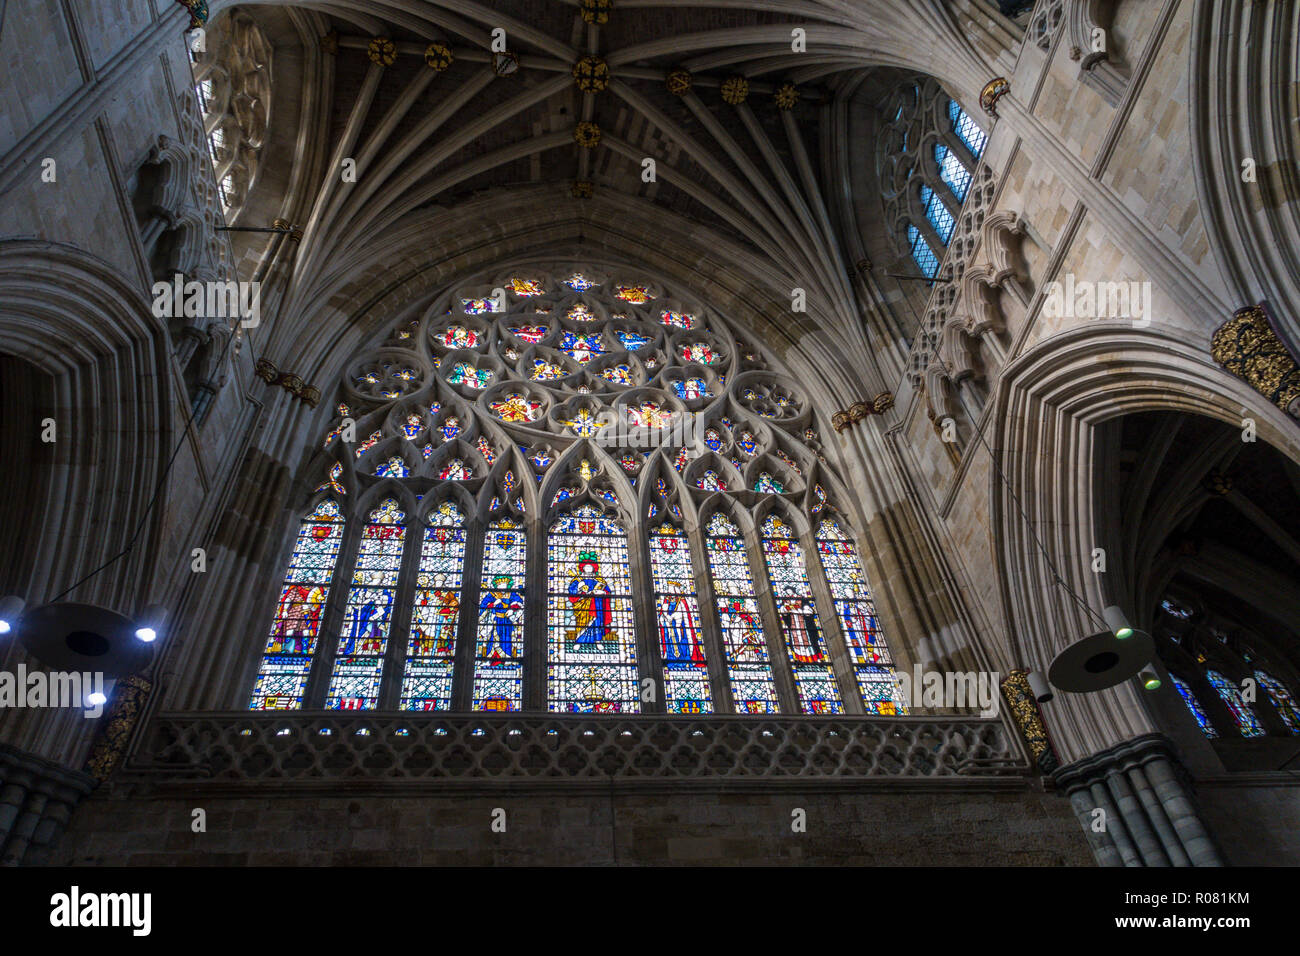 The Great West Window in Exeter cathedral, which has longest uniterrupted gothic stone vaulted ceiling of any cathedral in the world. Stock Photo